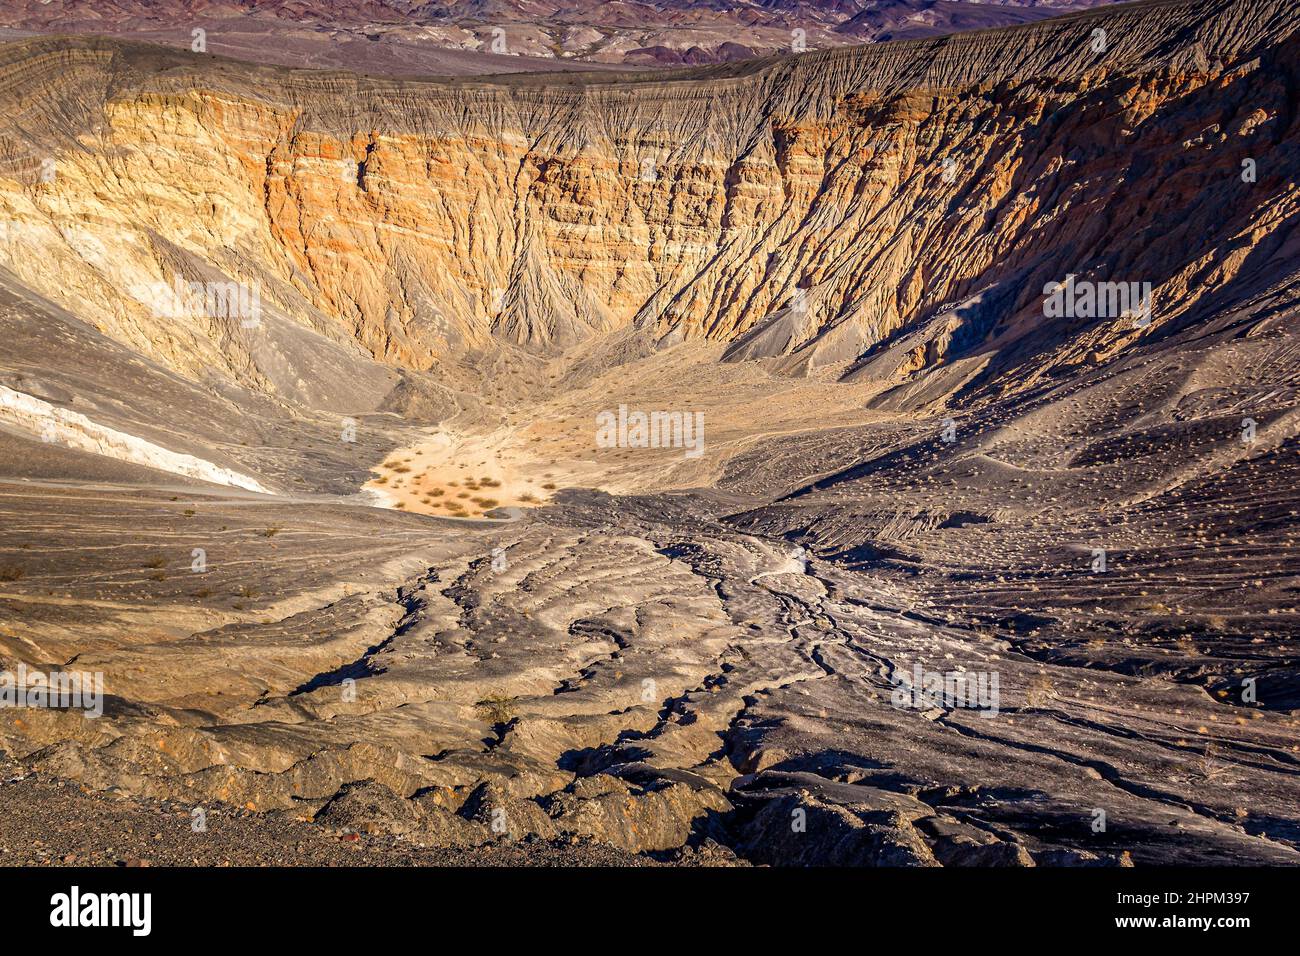 Il cratere Ubehebe nel Death Valley National Park, USA Foto Stock